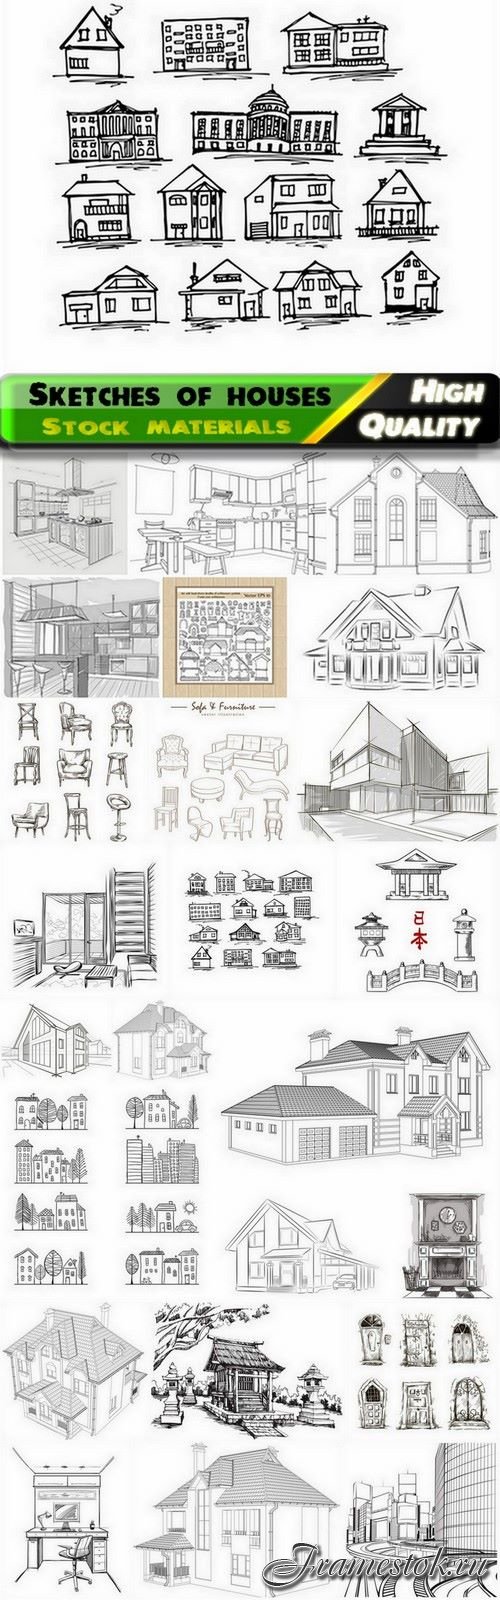 Sketches and drawings of houses and buildings - 25 Eps